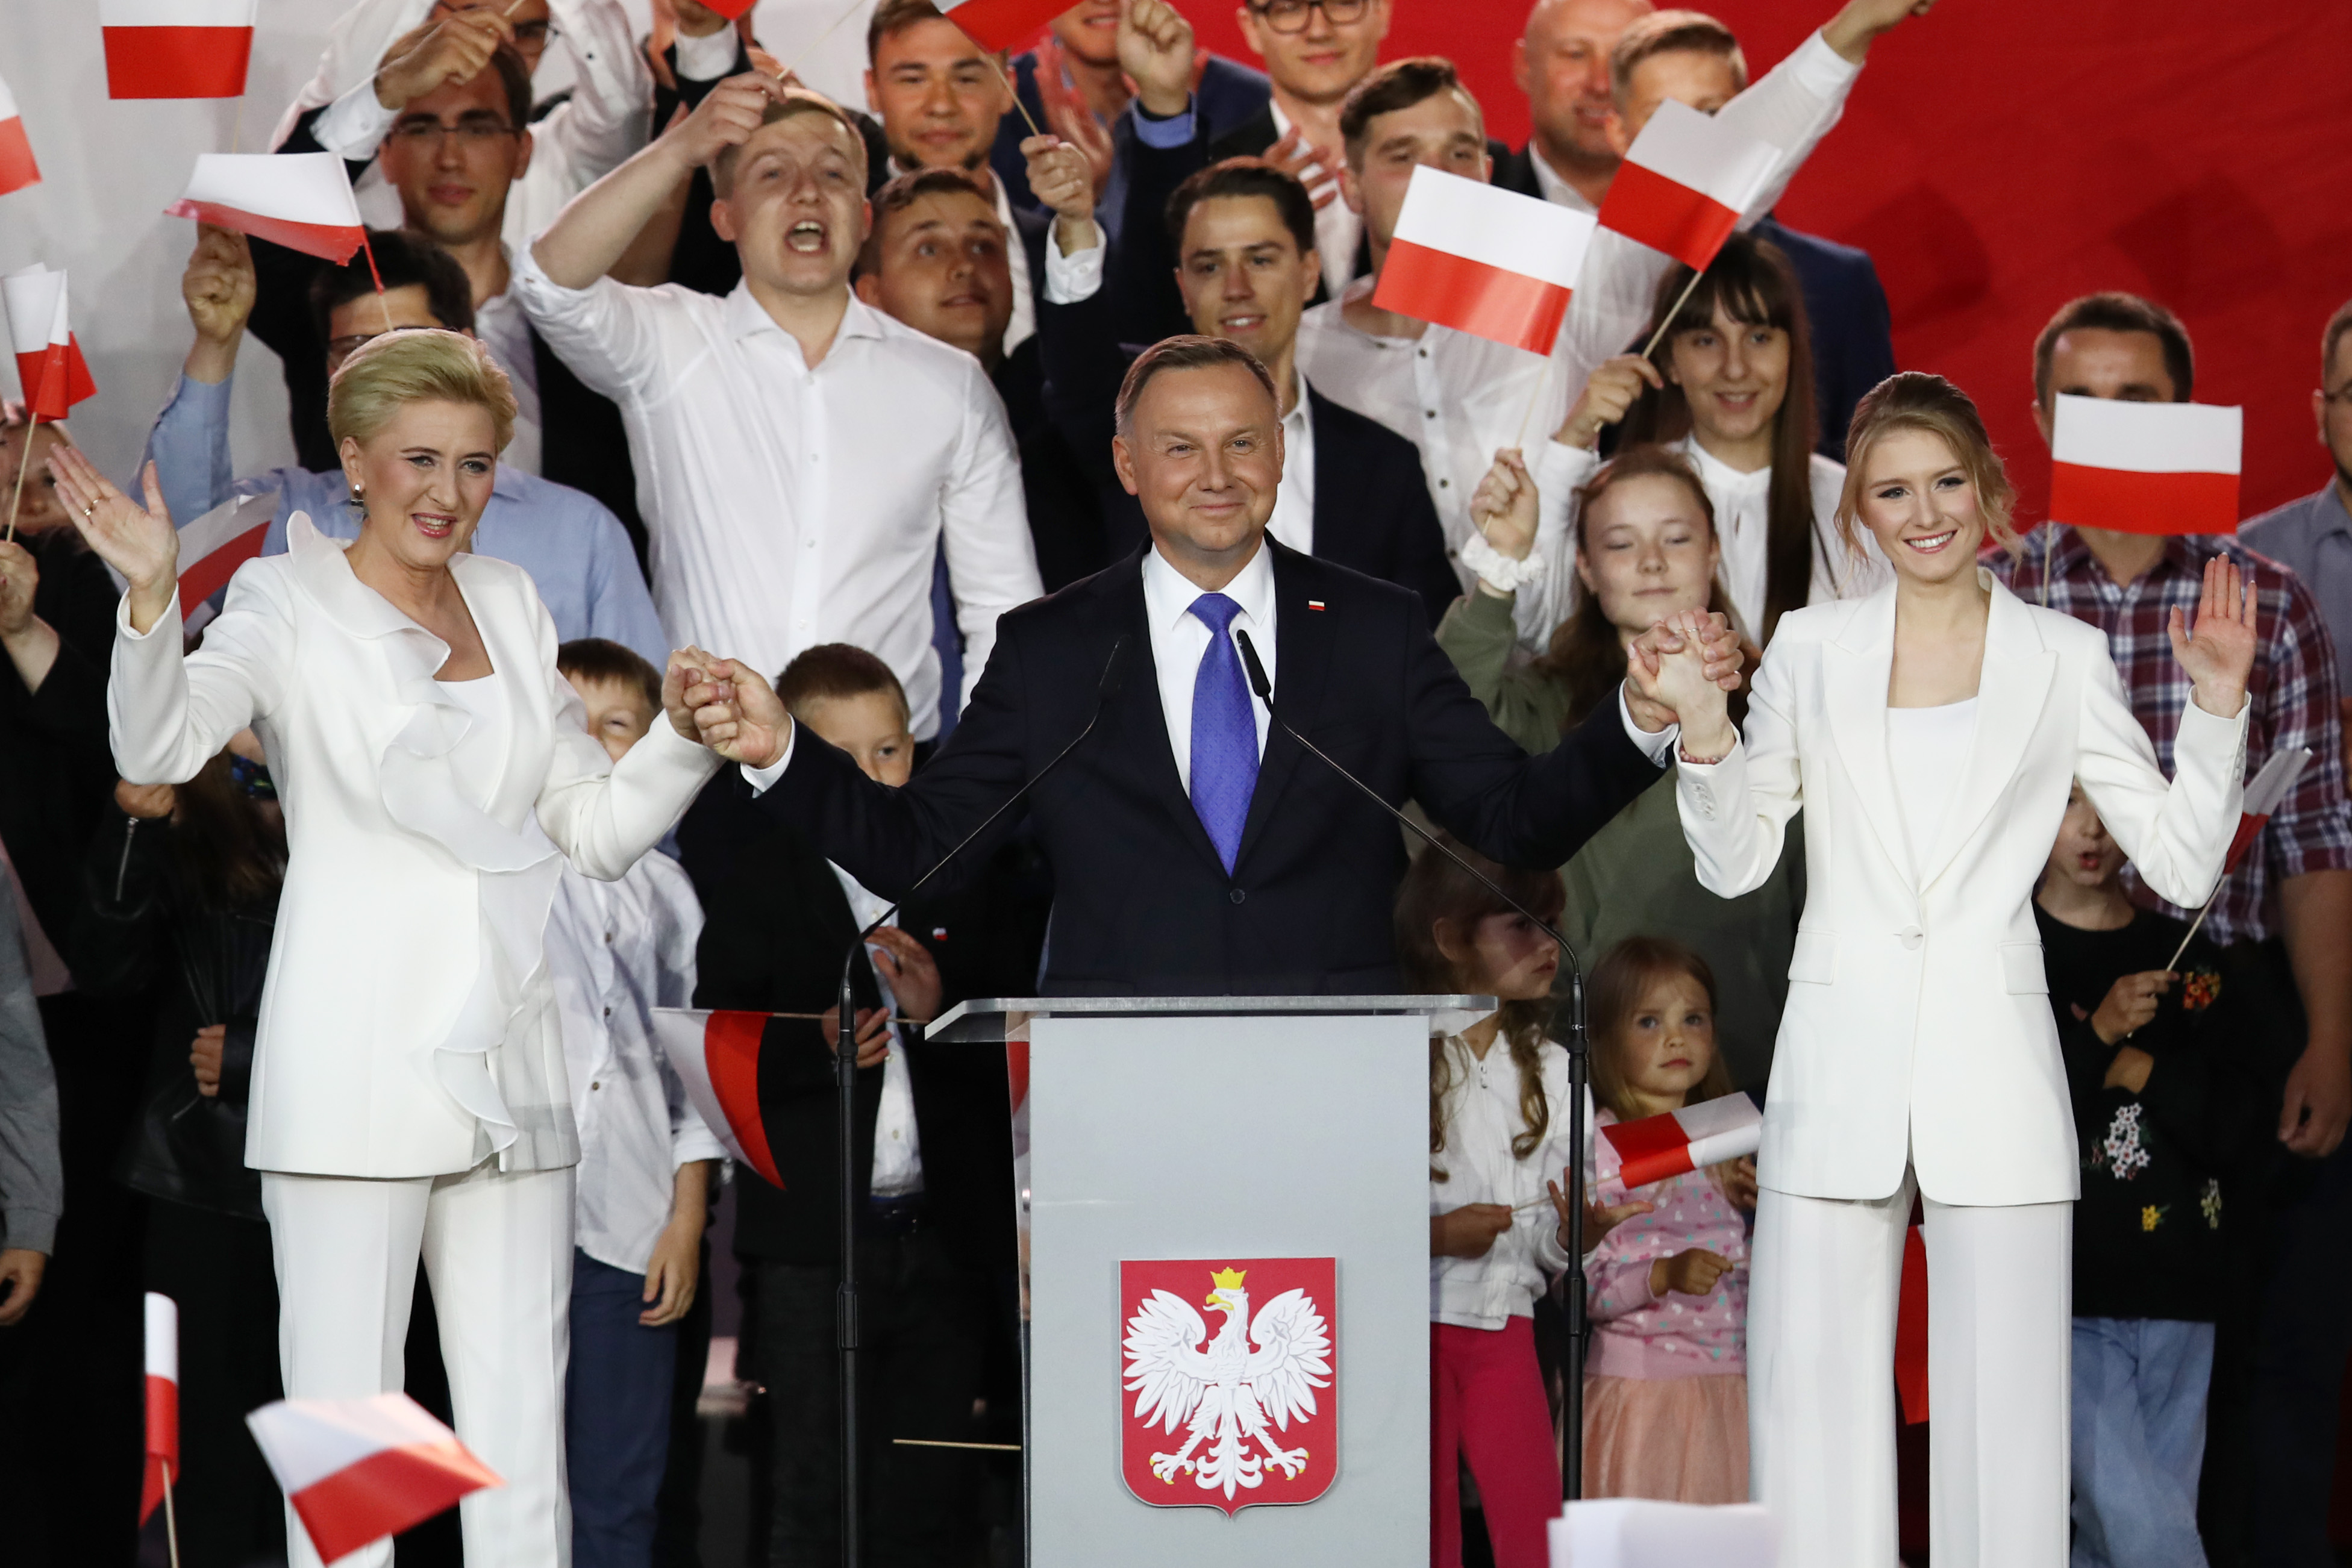 Andrzej Duda Wins 2nd Term After Tight Race in Poland - The New York Times